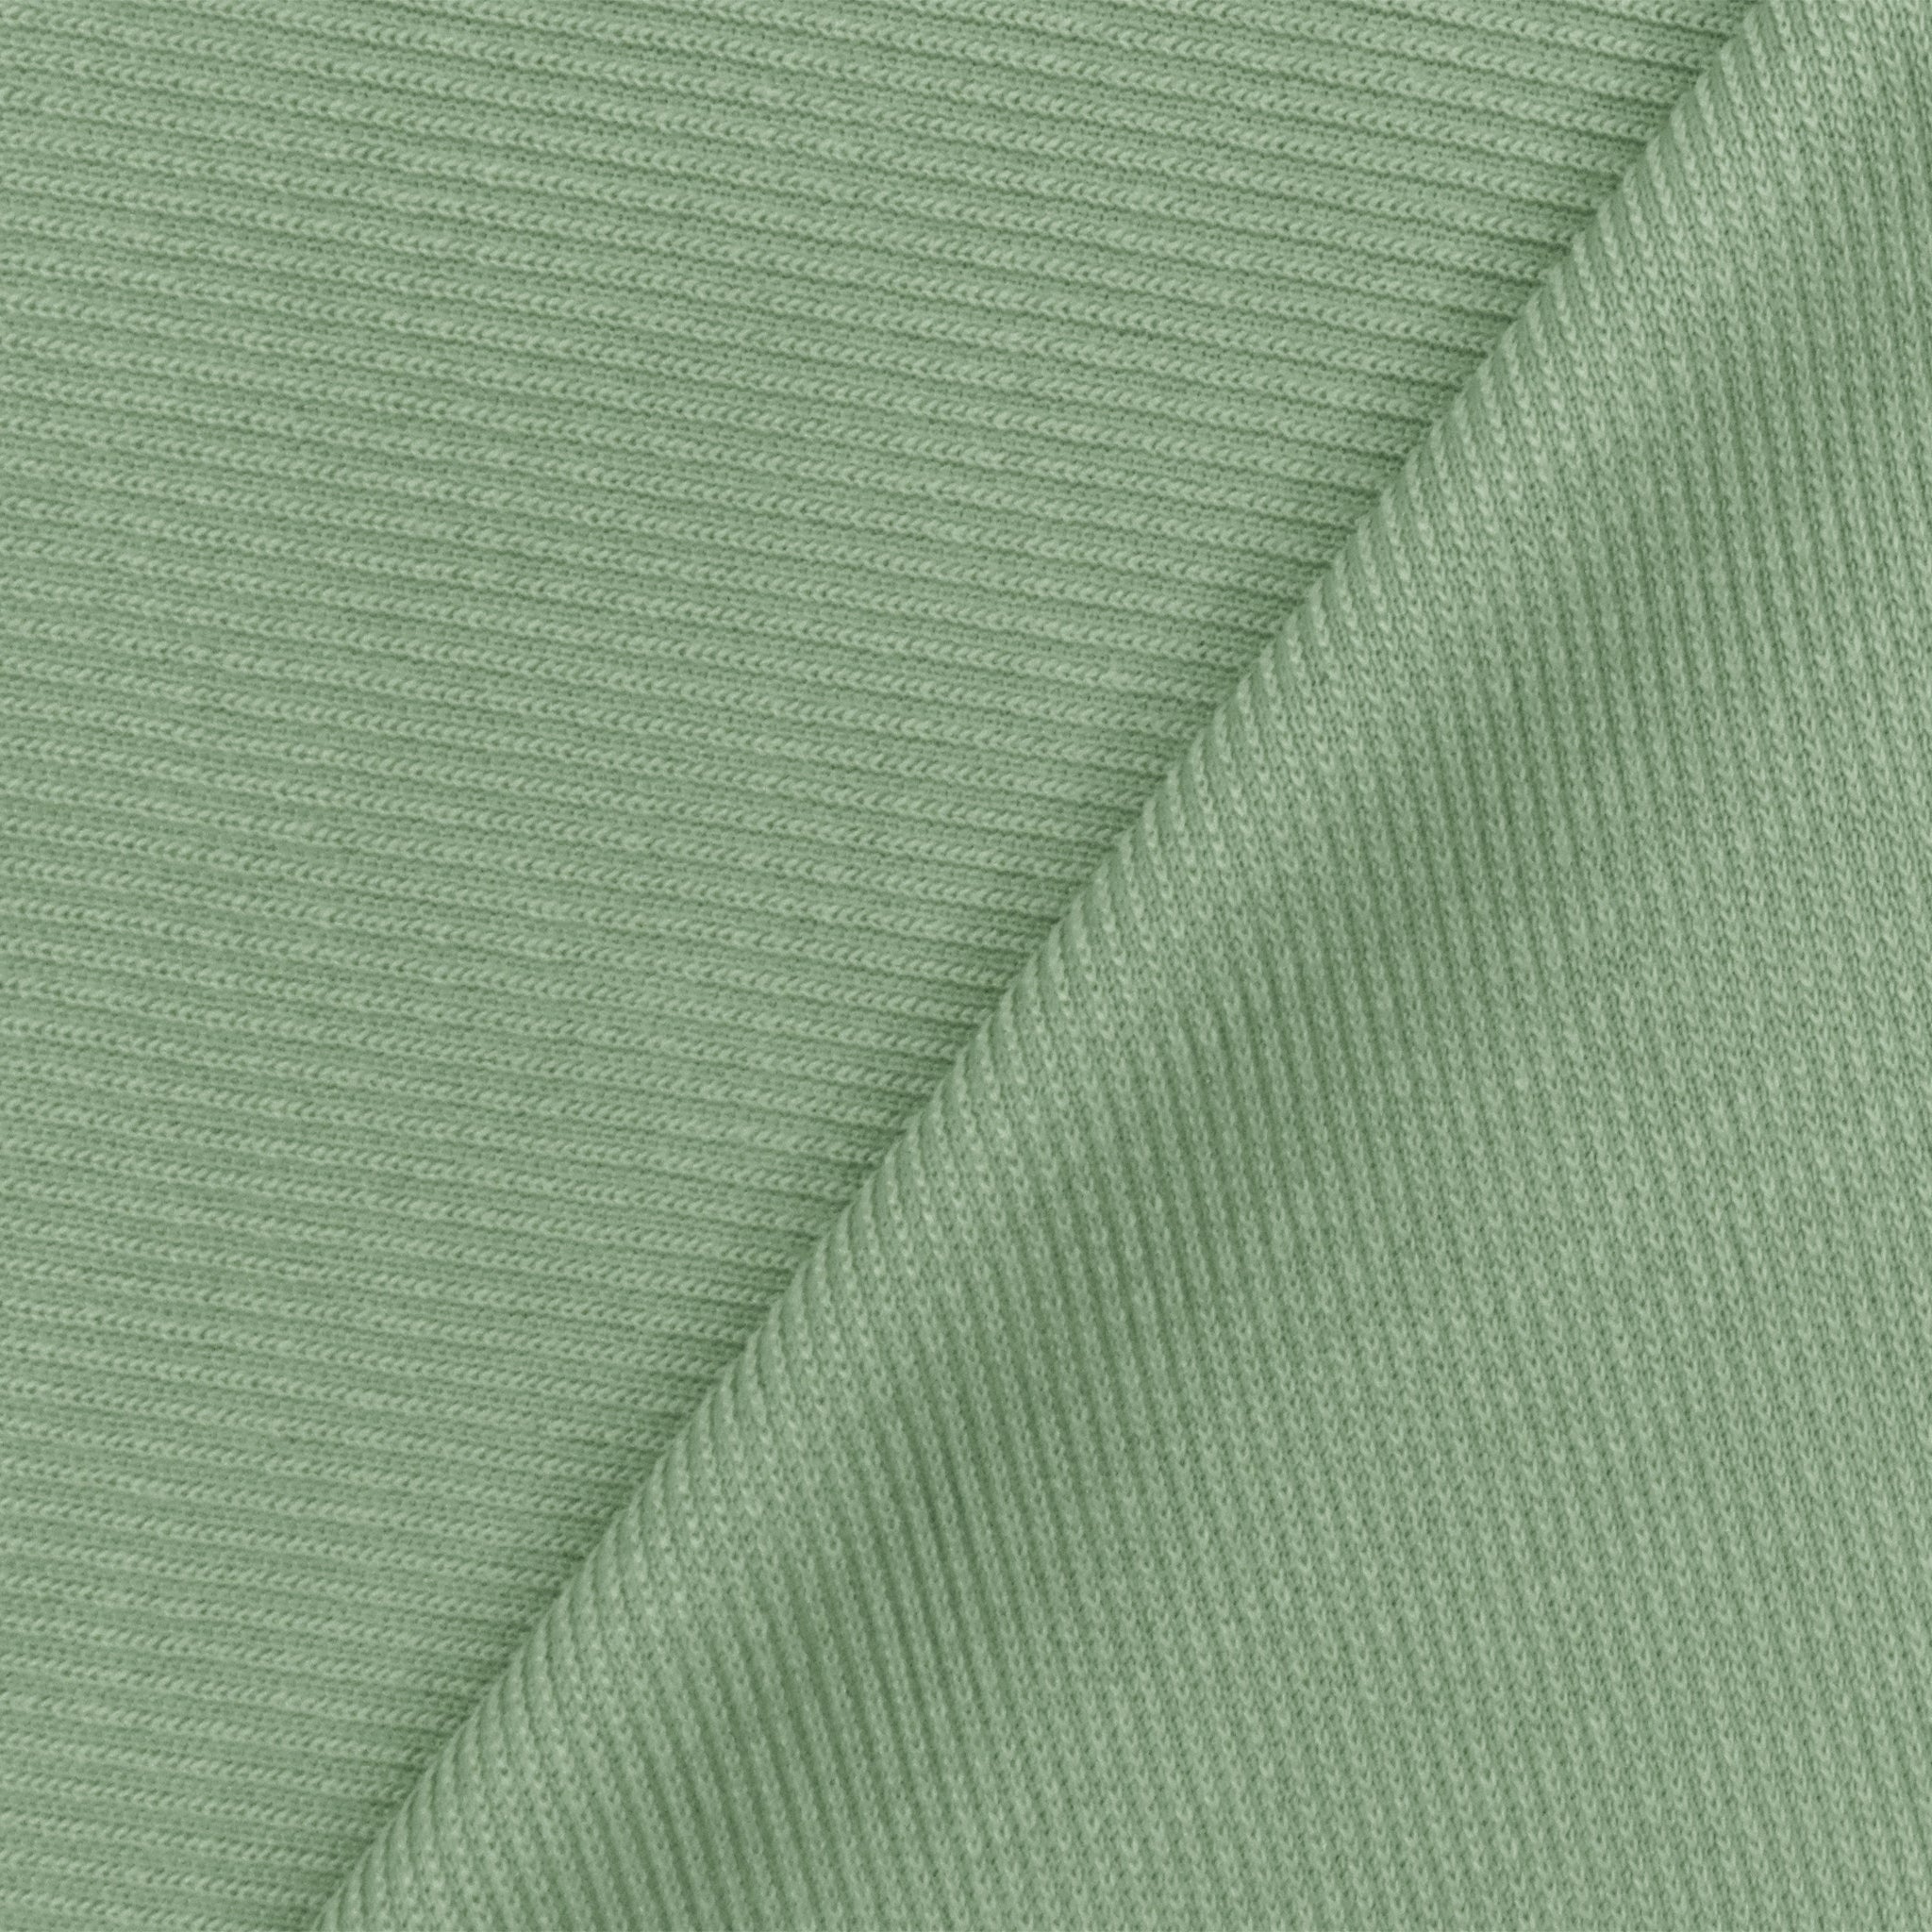 Lime Green Ribbed Knit Fabric Texture Picture